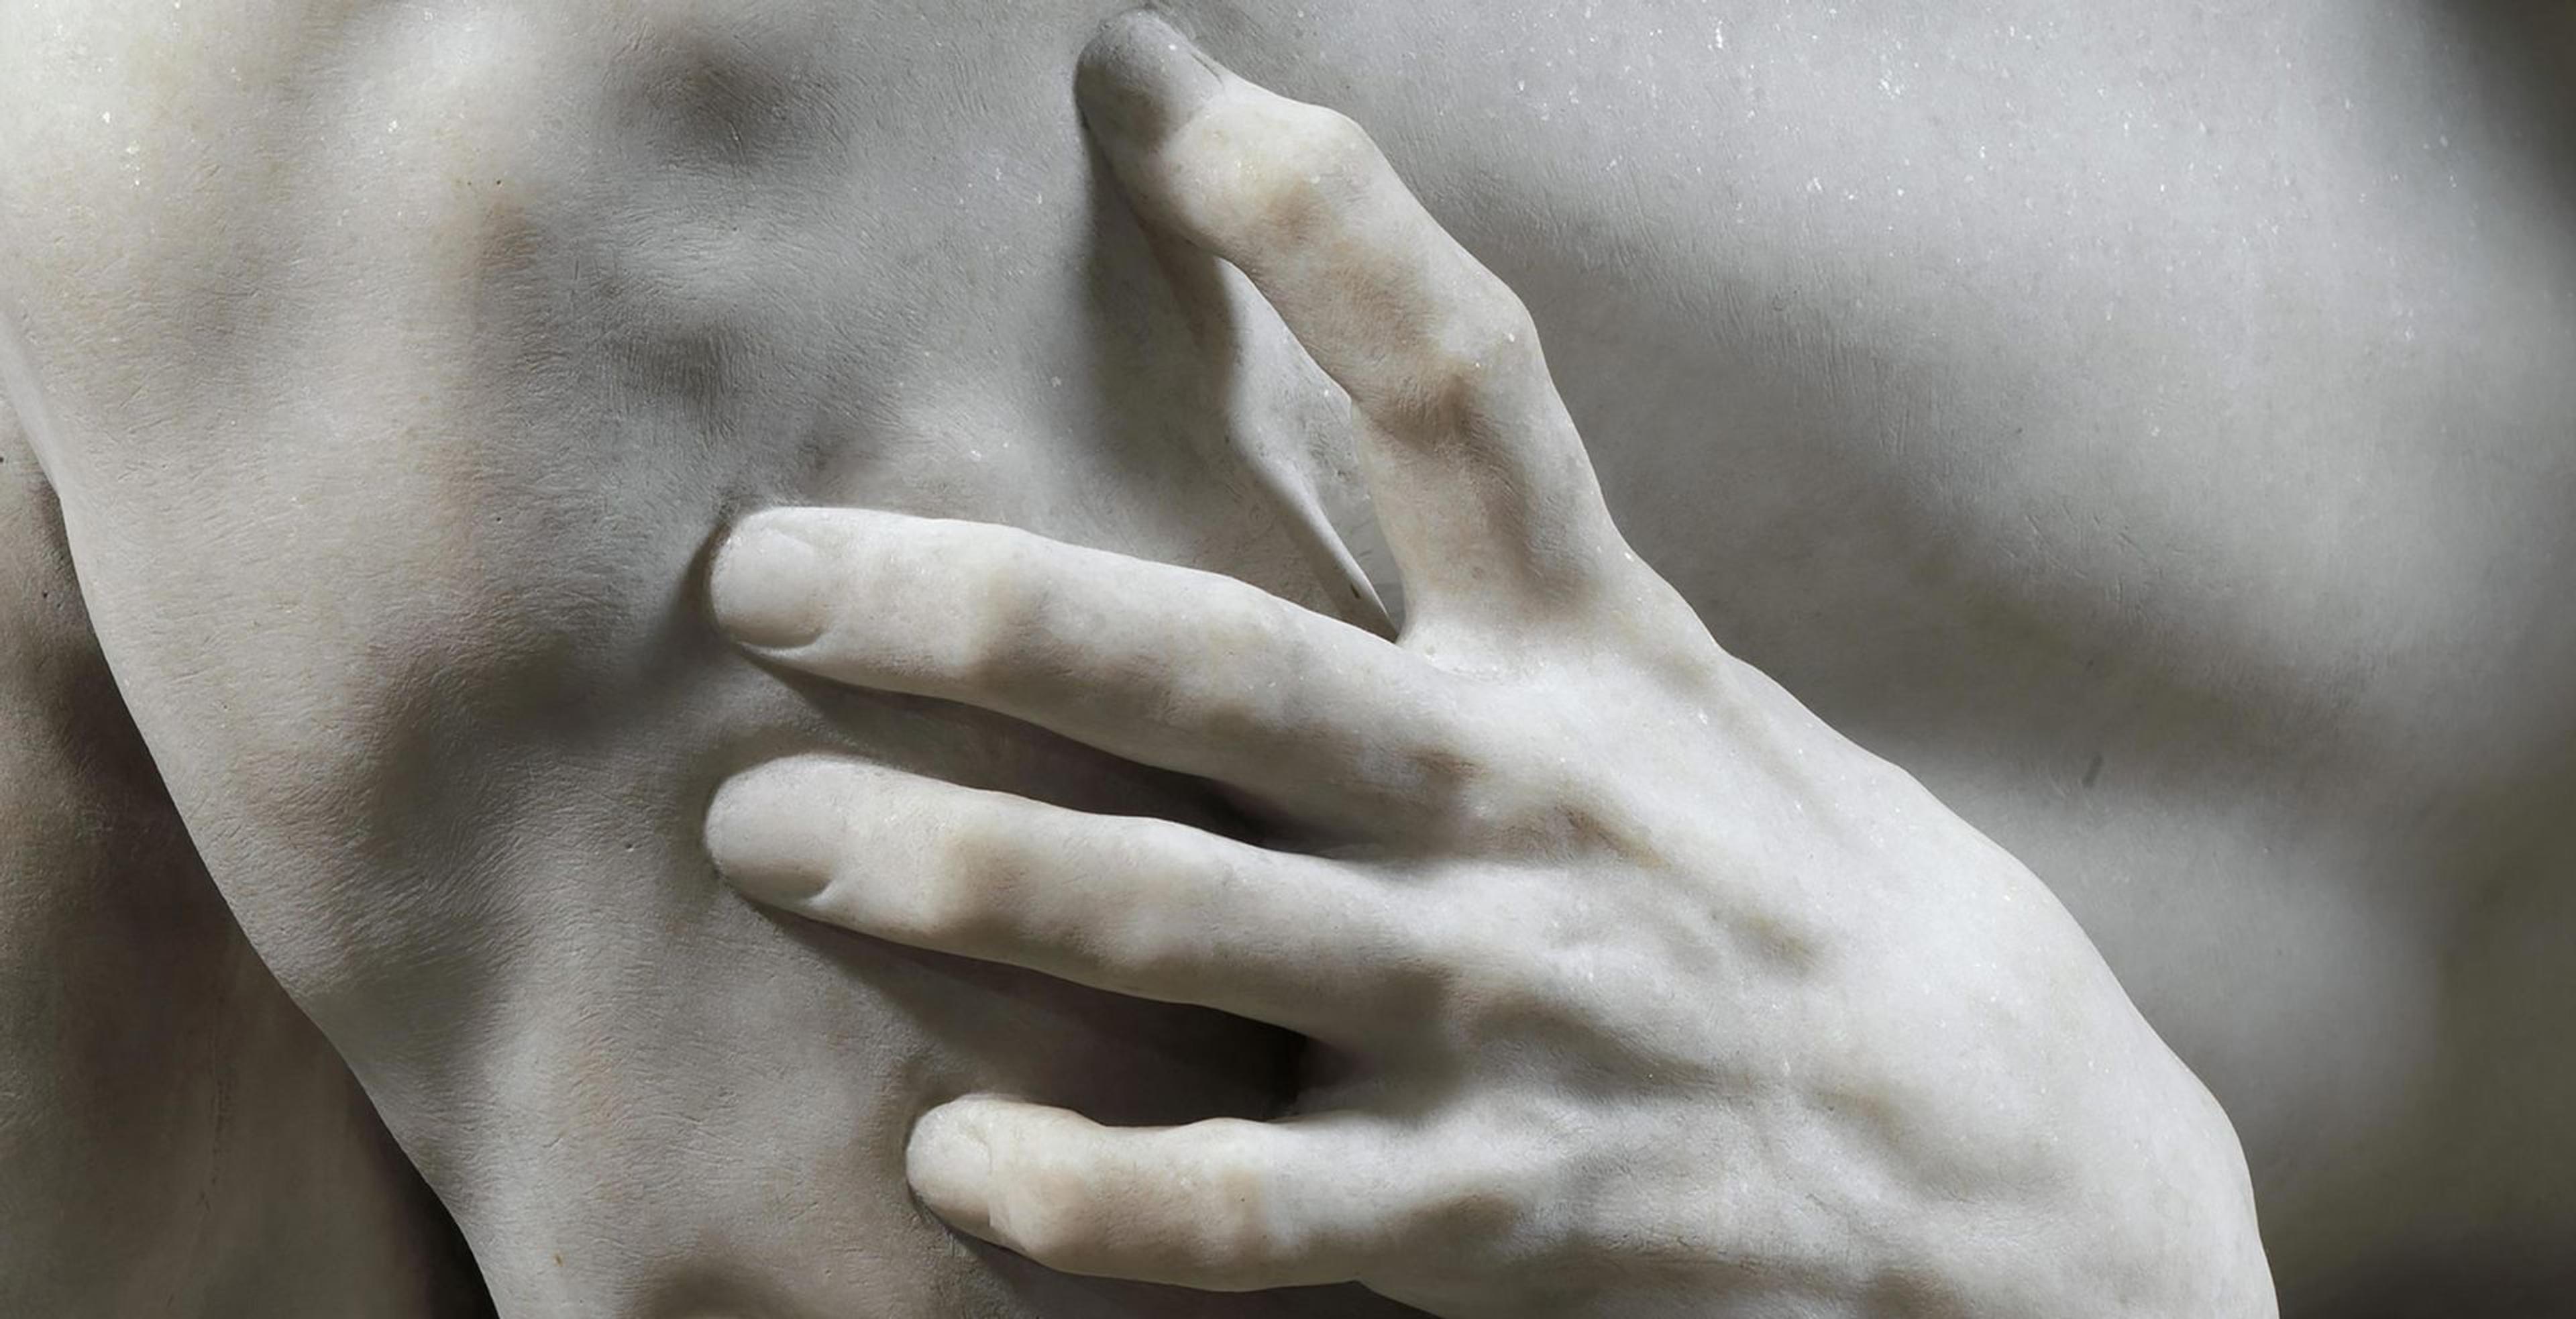 Detail view of a marble sculpture in which we see a hand grasping another piece of flesh